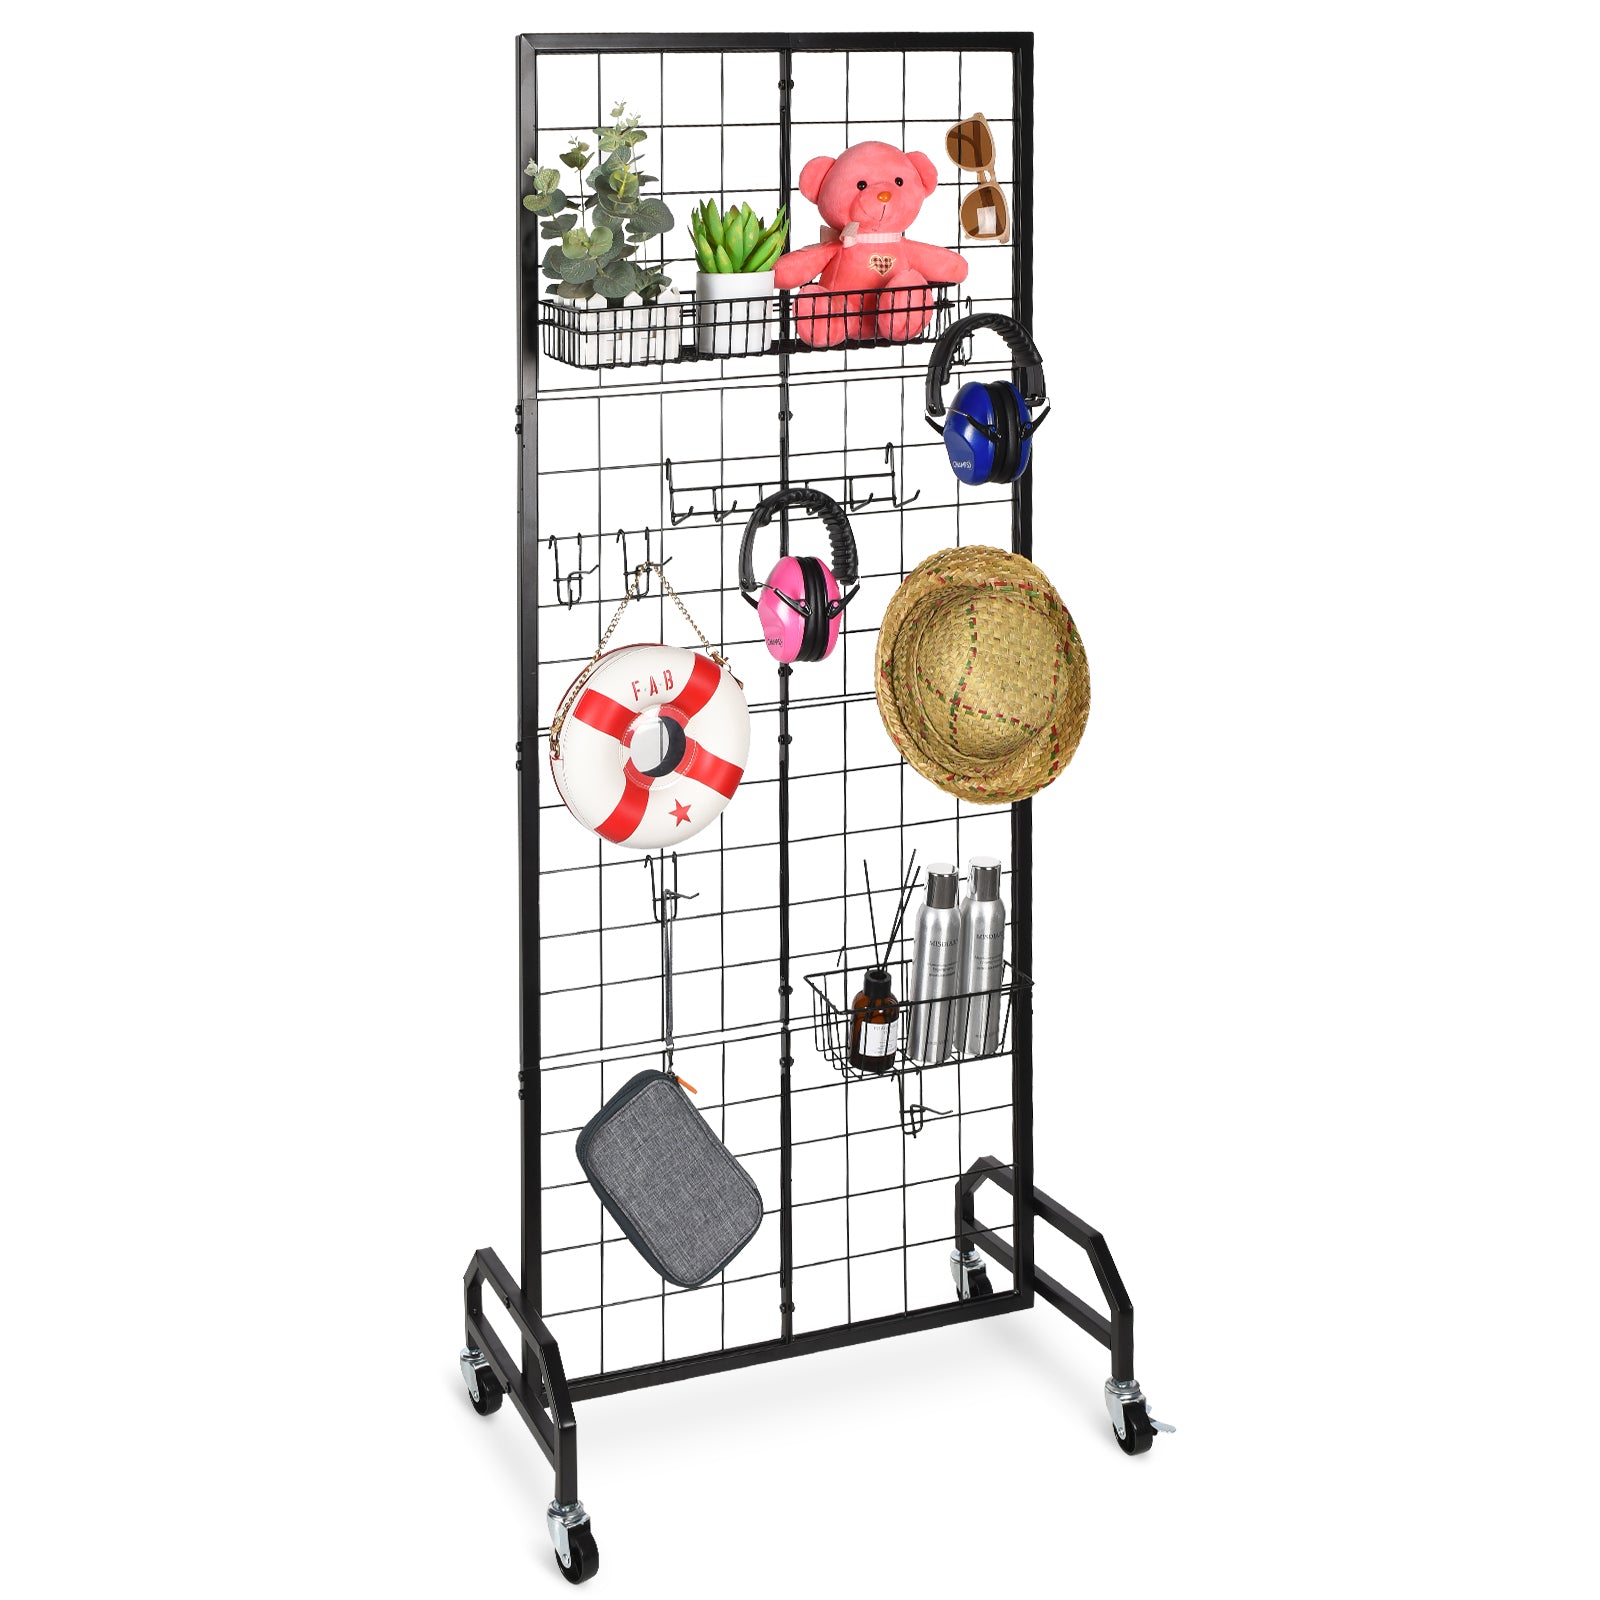 GADFISH Gridwall Panel Display Stand, Heavy-duty Movable Wire Gridwall Display Racks, Floorstanding Double Side Display Stand for Home Organization, Retail, Trade Show, Arts Craft Fair (Black)